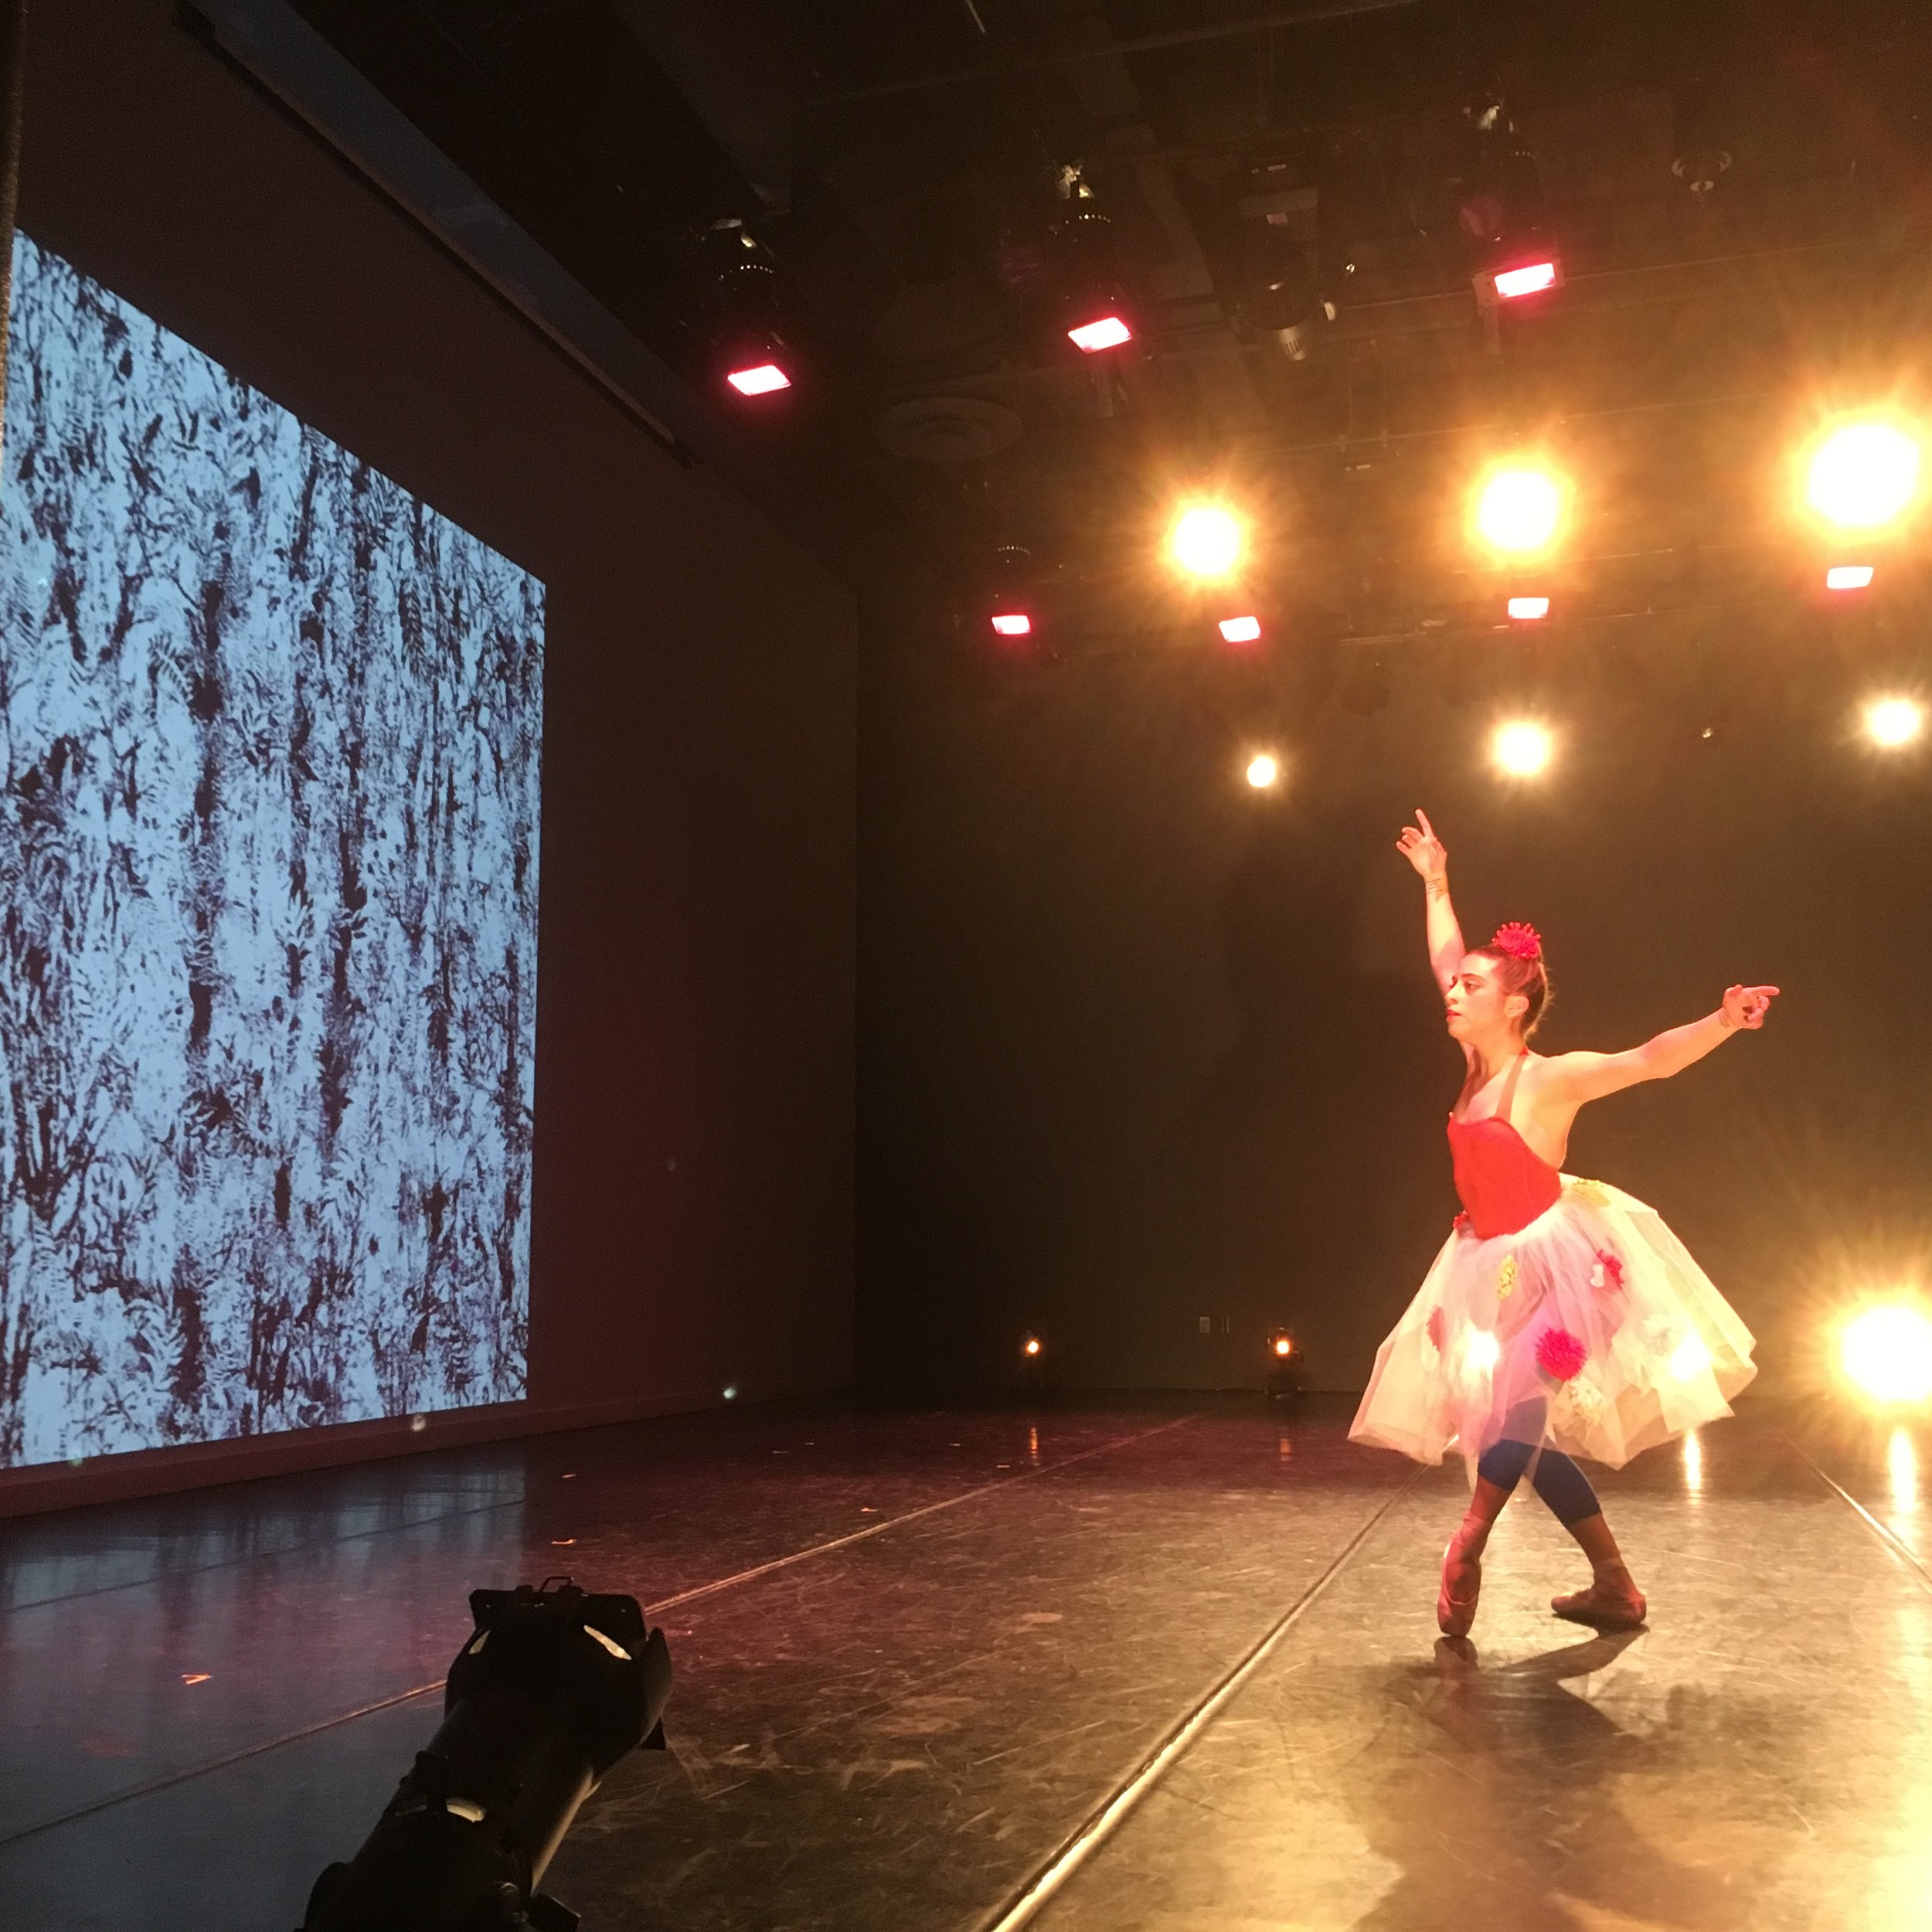  ”spring is almost here” by choreographer Janice Rosario in collaboration with visual artist Jessica Weiss 